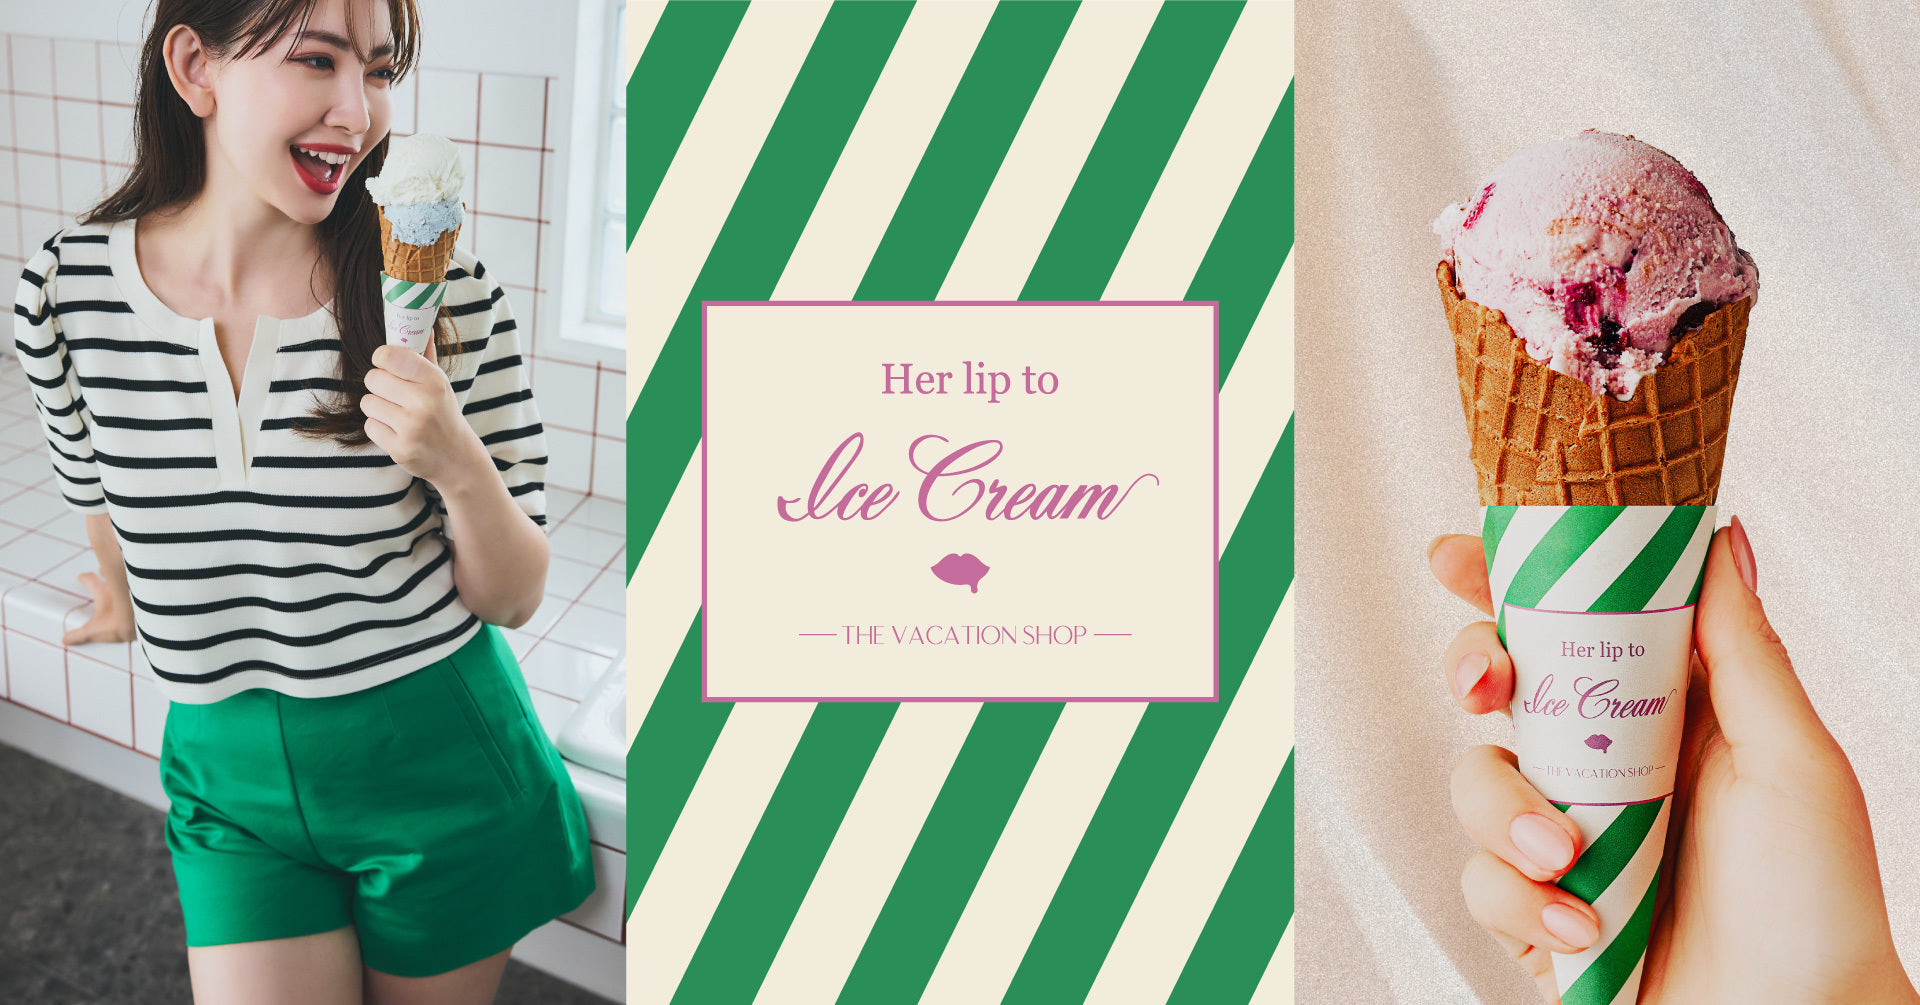 Her lip to Ice Cream -THE VACATION SHOP- is open for a limited time